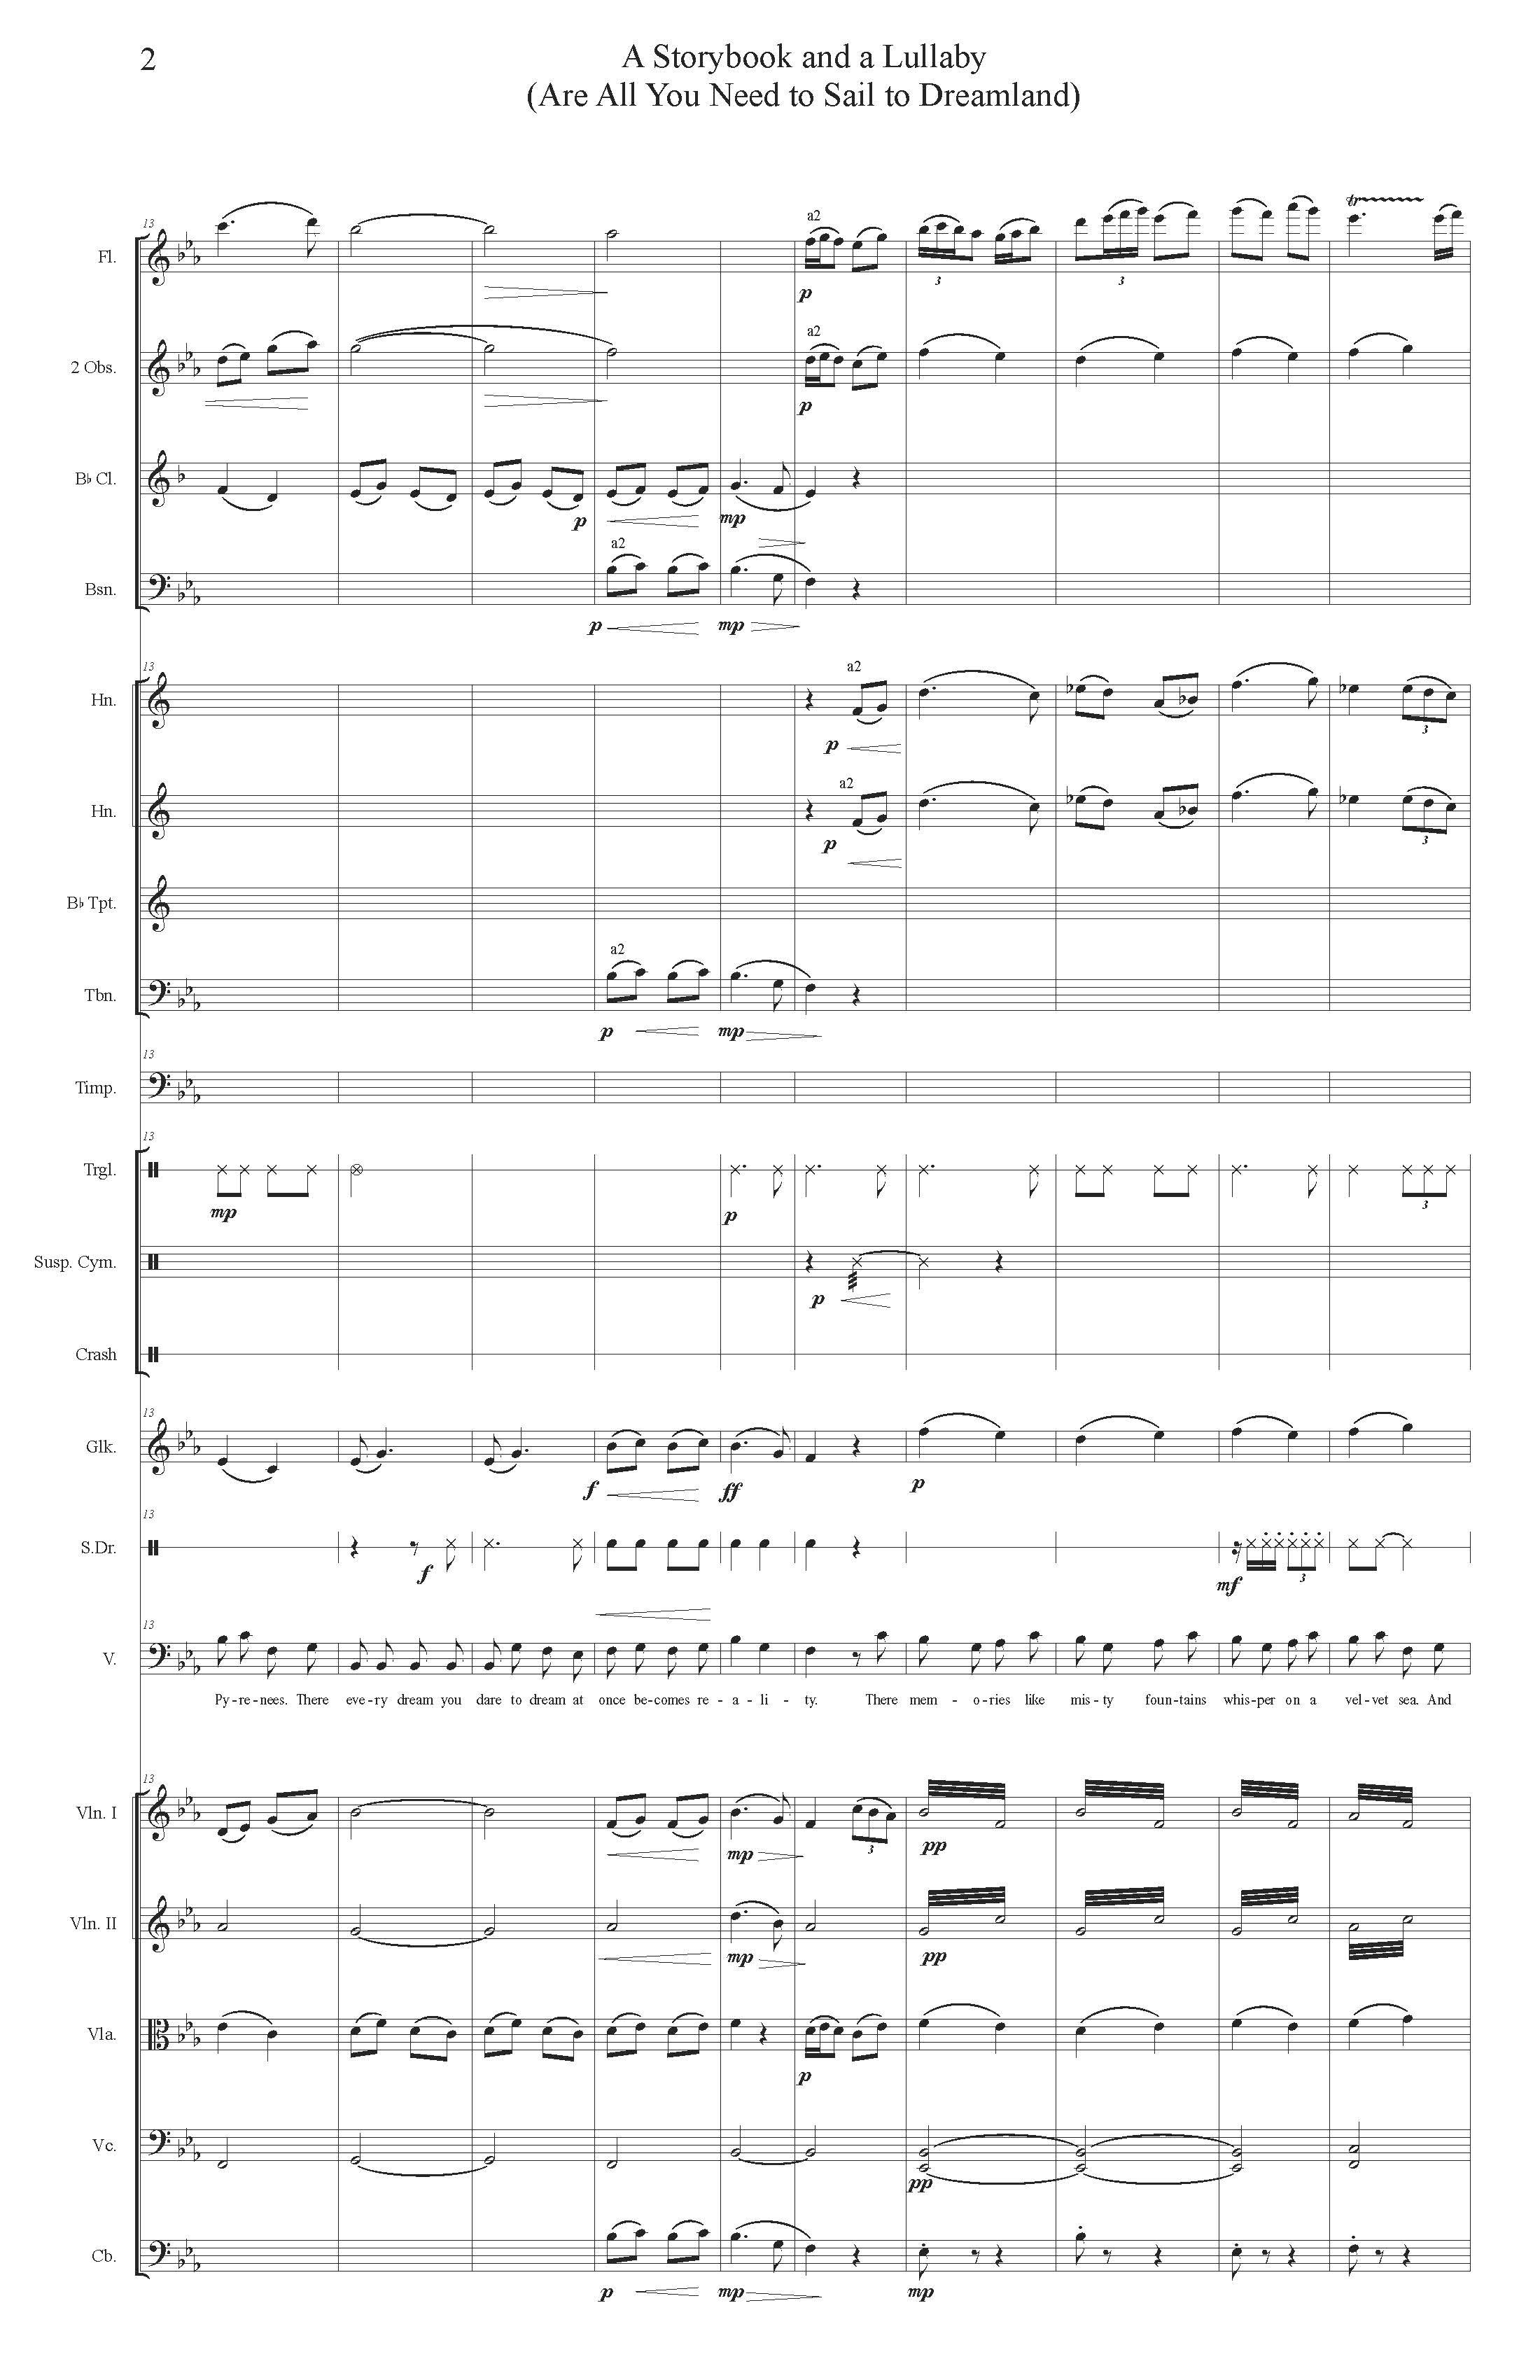 A STORYBOOK AND A LULLABY ORCH - Score_Page_02.jpg